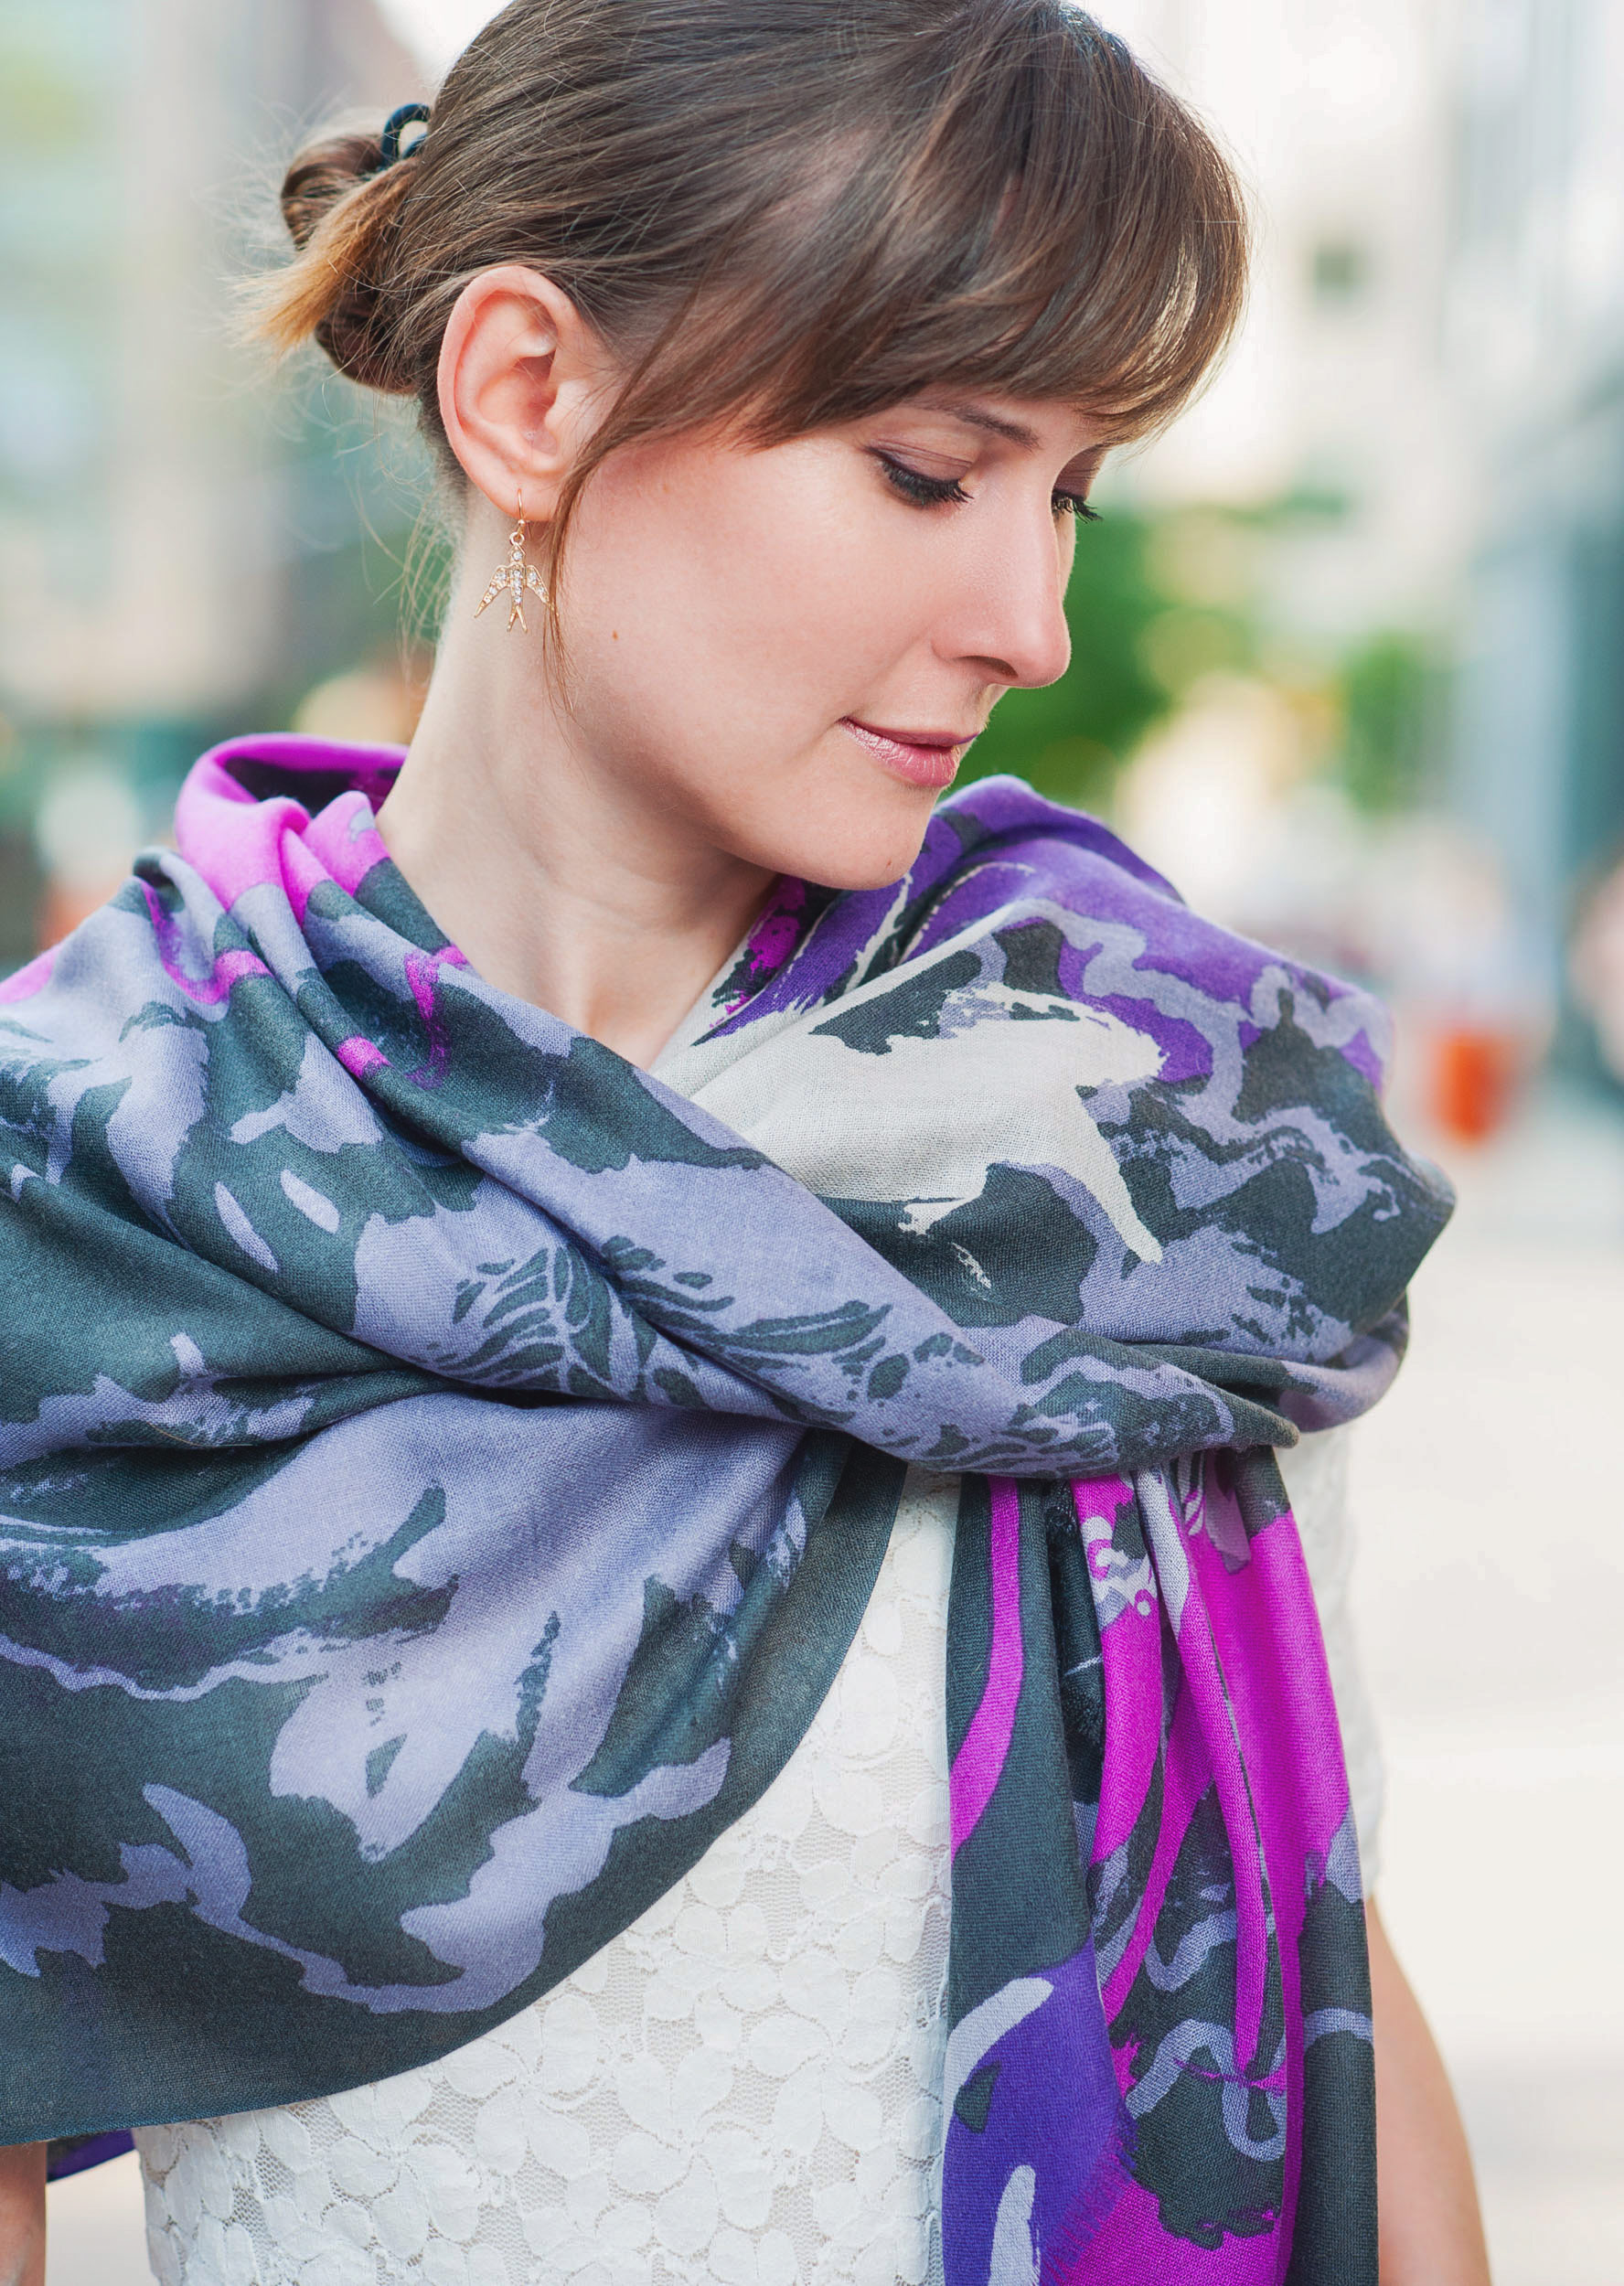 PORTRAIT-OF-JULIA-BROGAN-MODELLING-ONE-OF-A-LINE-OF-SCARVES-IN-NEW-YORK-CITY